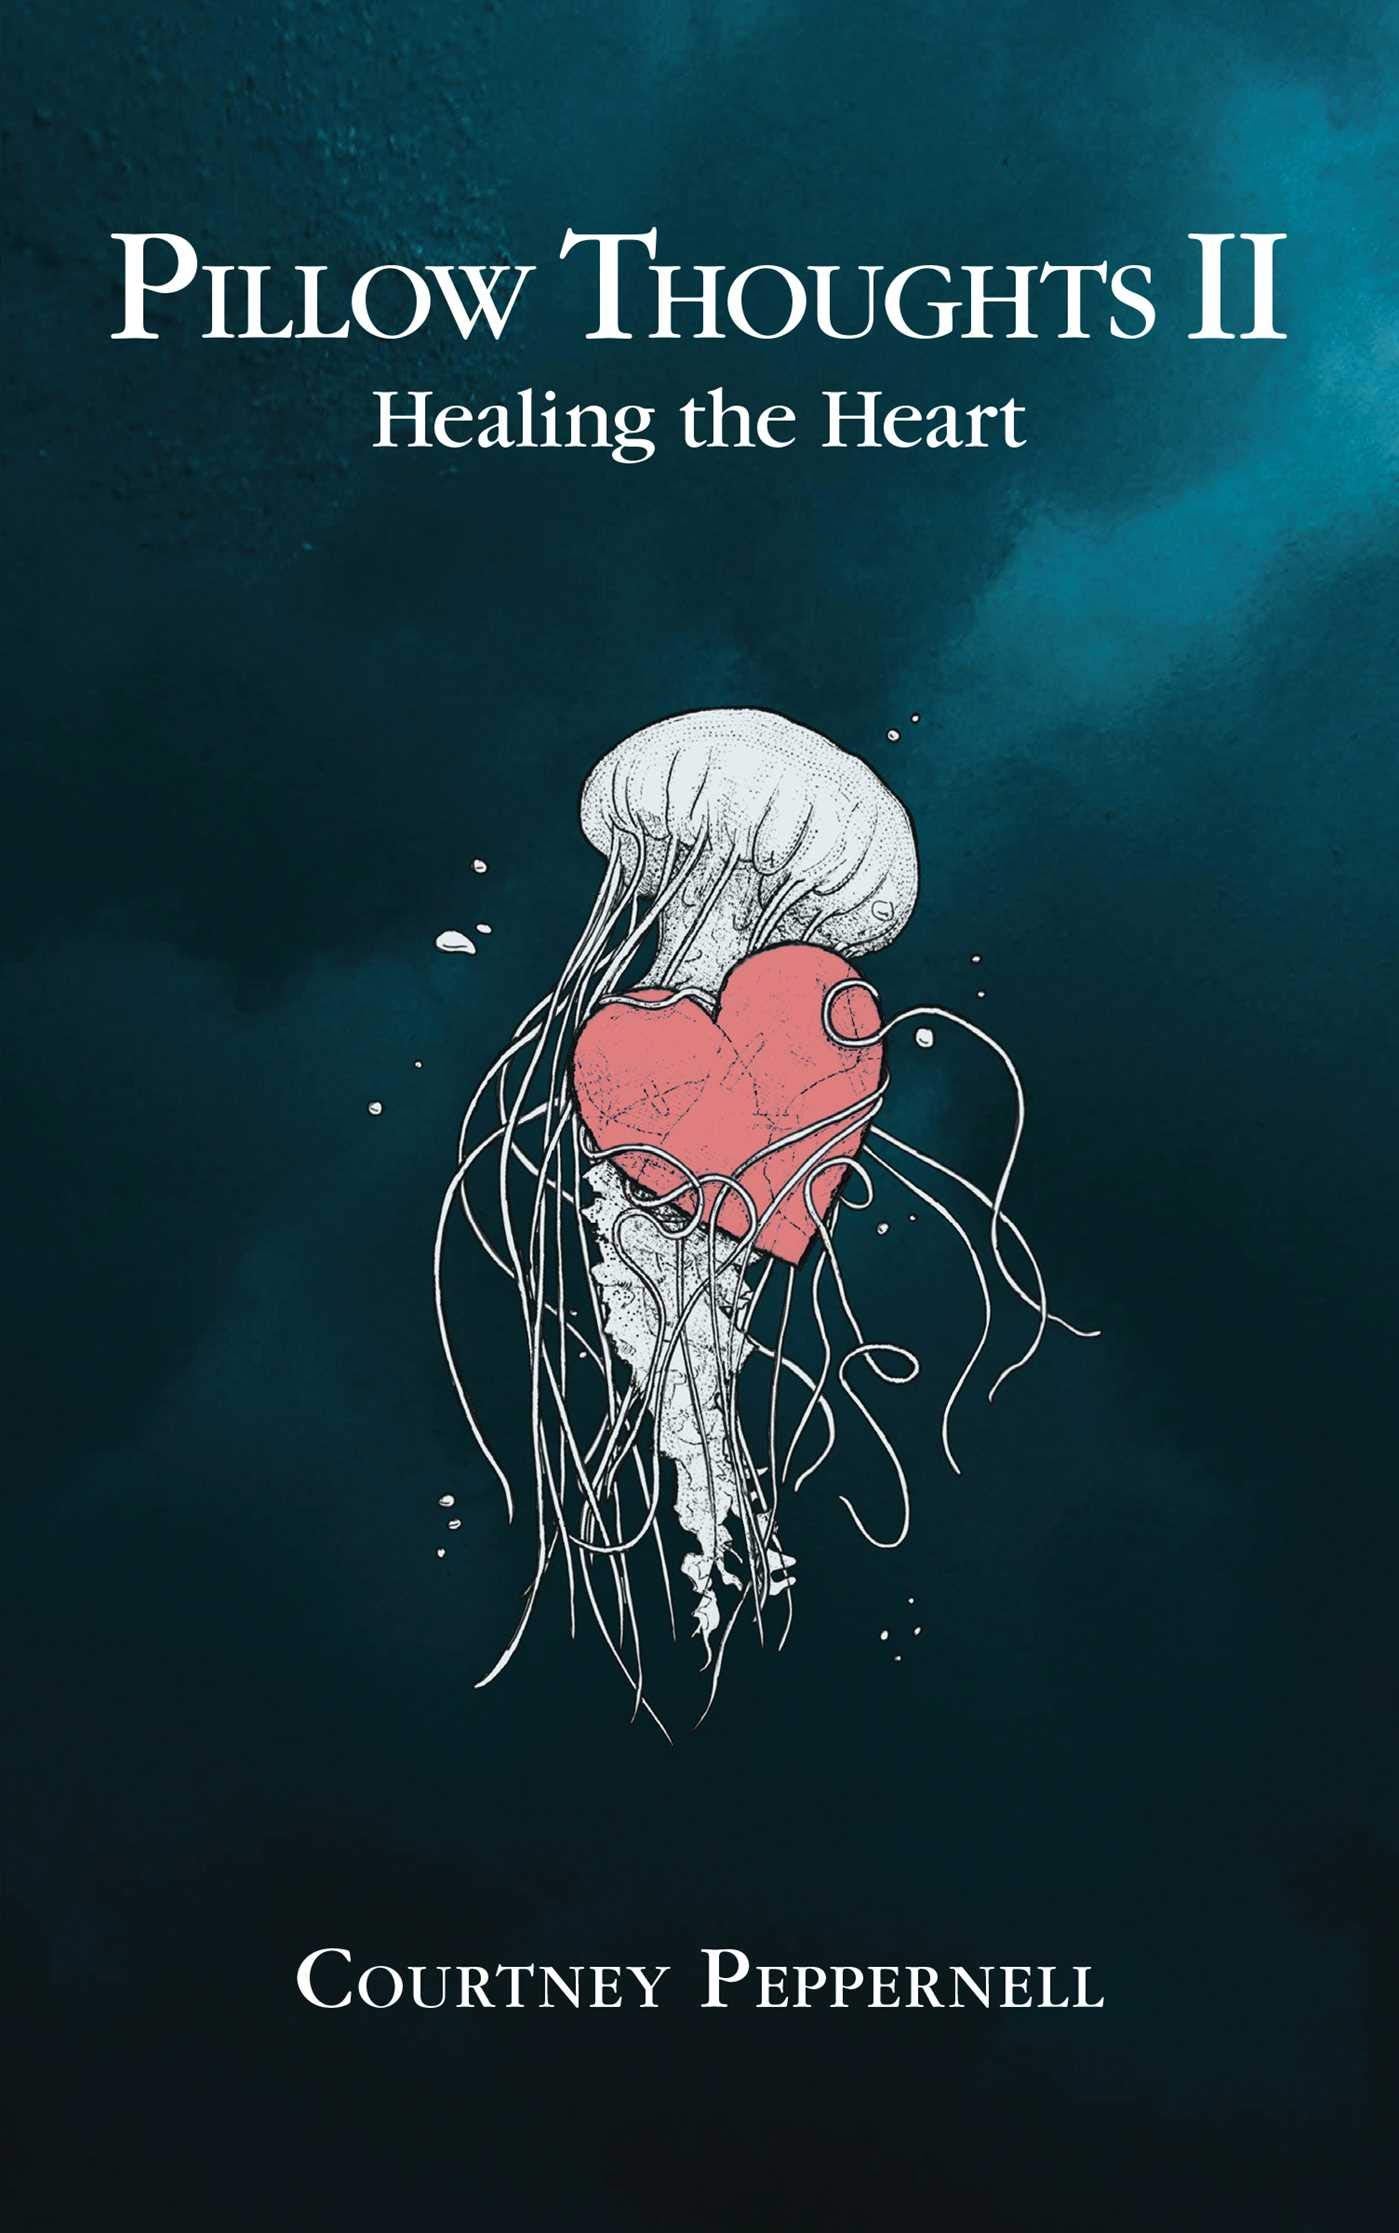 Pillow Thoughts II: Mending the Heart [Pre-Order]